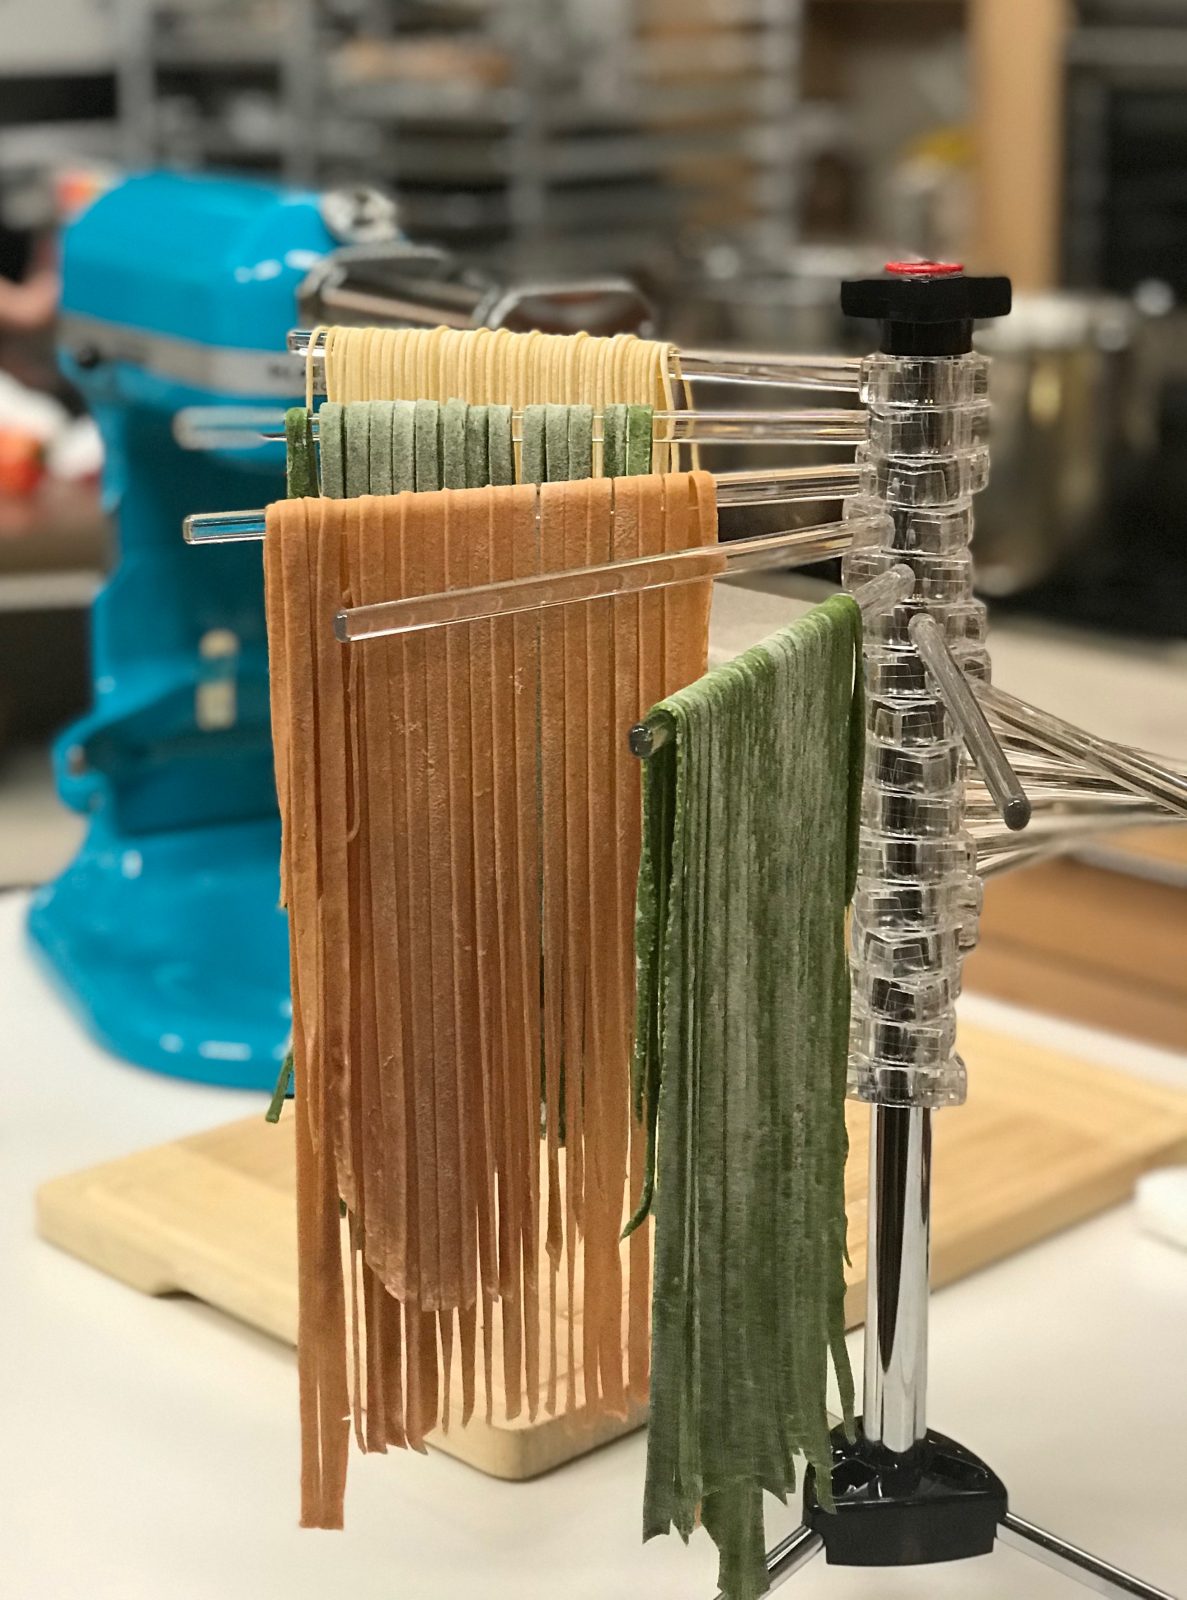 https://www.epicuricloud.com/wp-content/uploads/2019/05/Tomato-and-Spinach-Pasta-Dough-Recipe-1187x1600.jpg